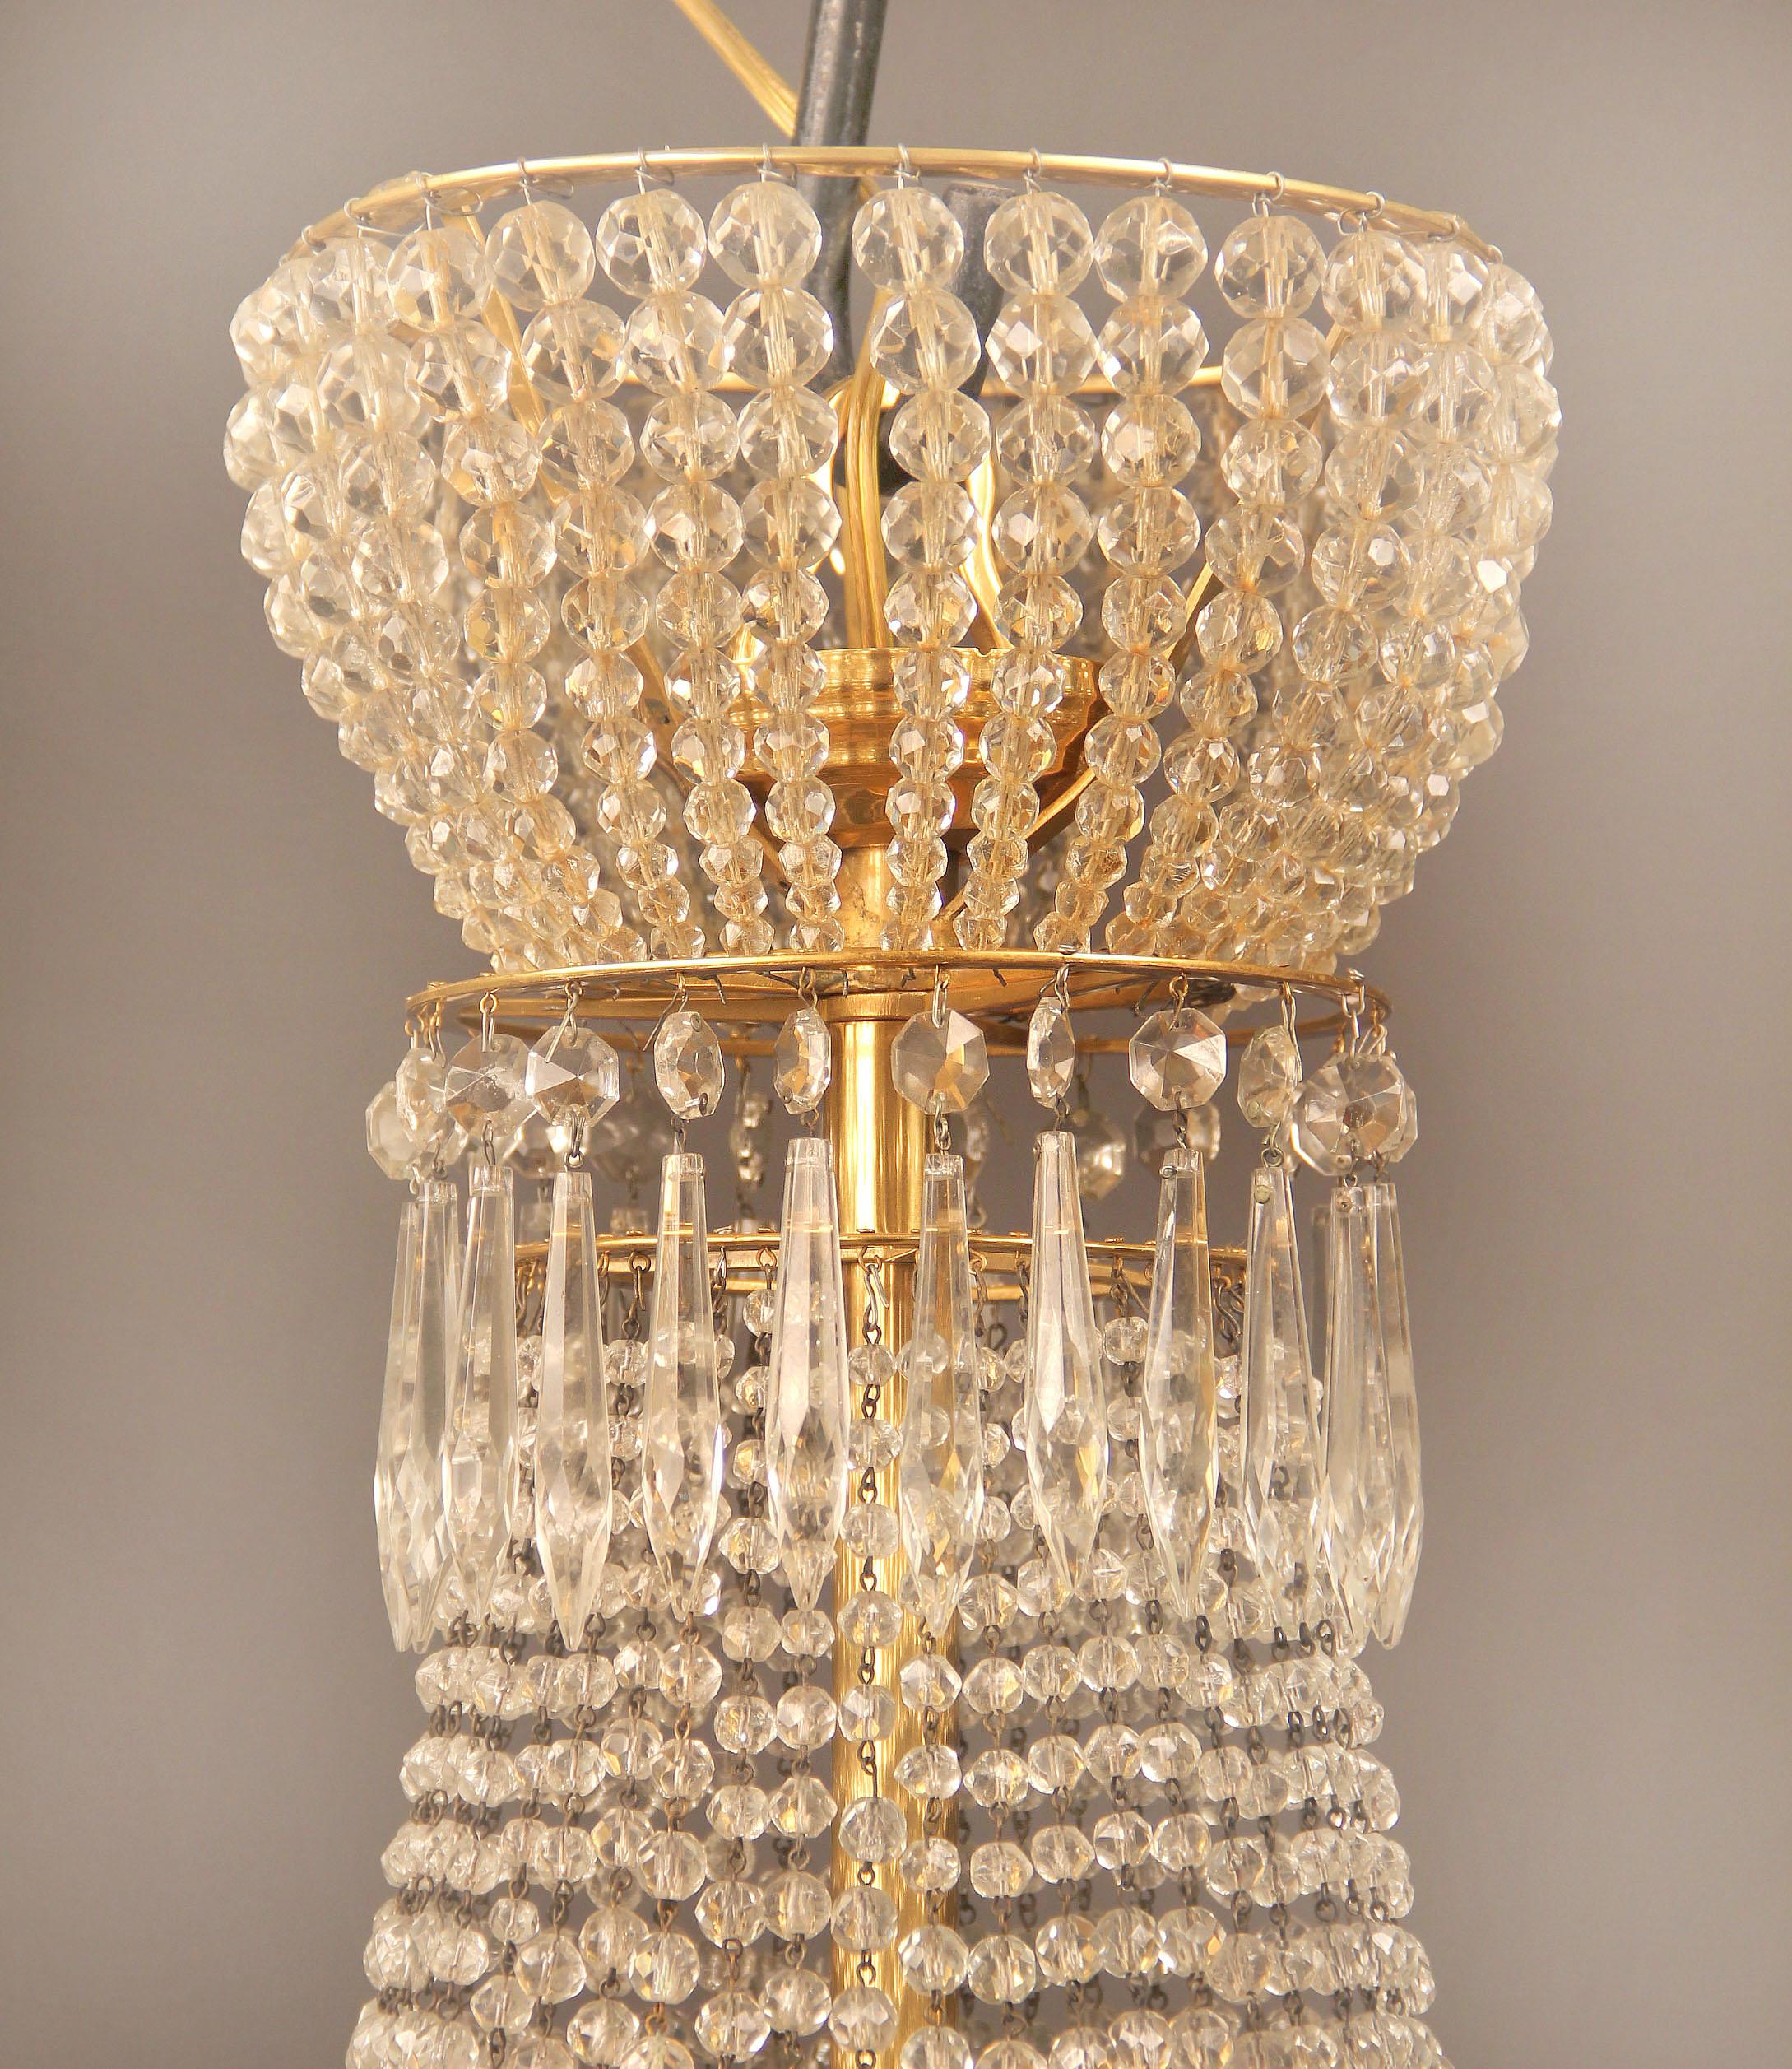 French Late 19th/Early 20th Century Gilt Bronze and Beaded EightLight Basket Chandelier For Sale